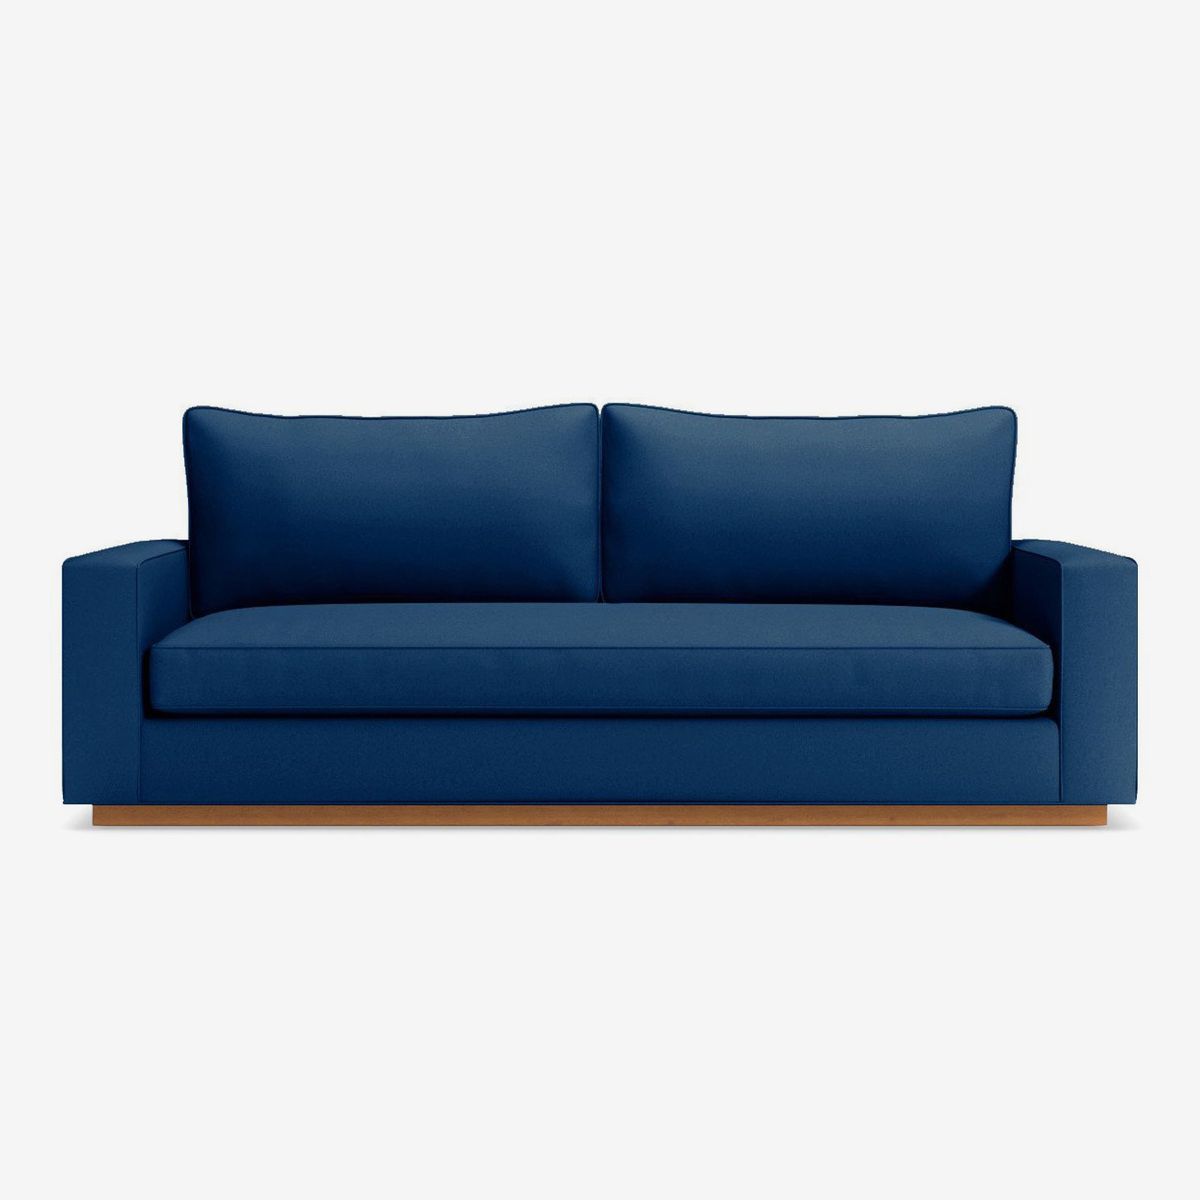 29 Best Sleeper Sofas Sofa Beds And, Who Makes The Best Sleeper Sofas